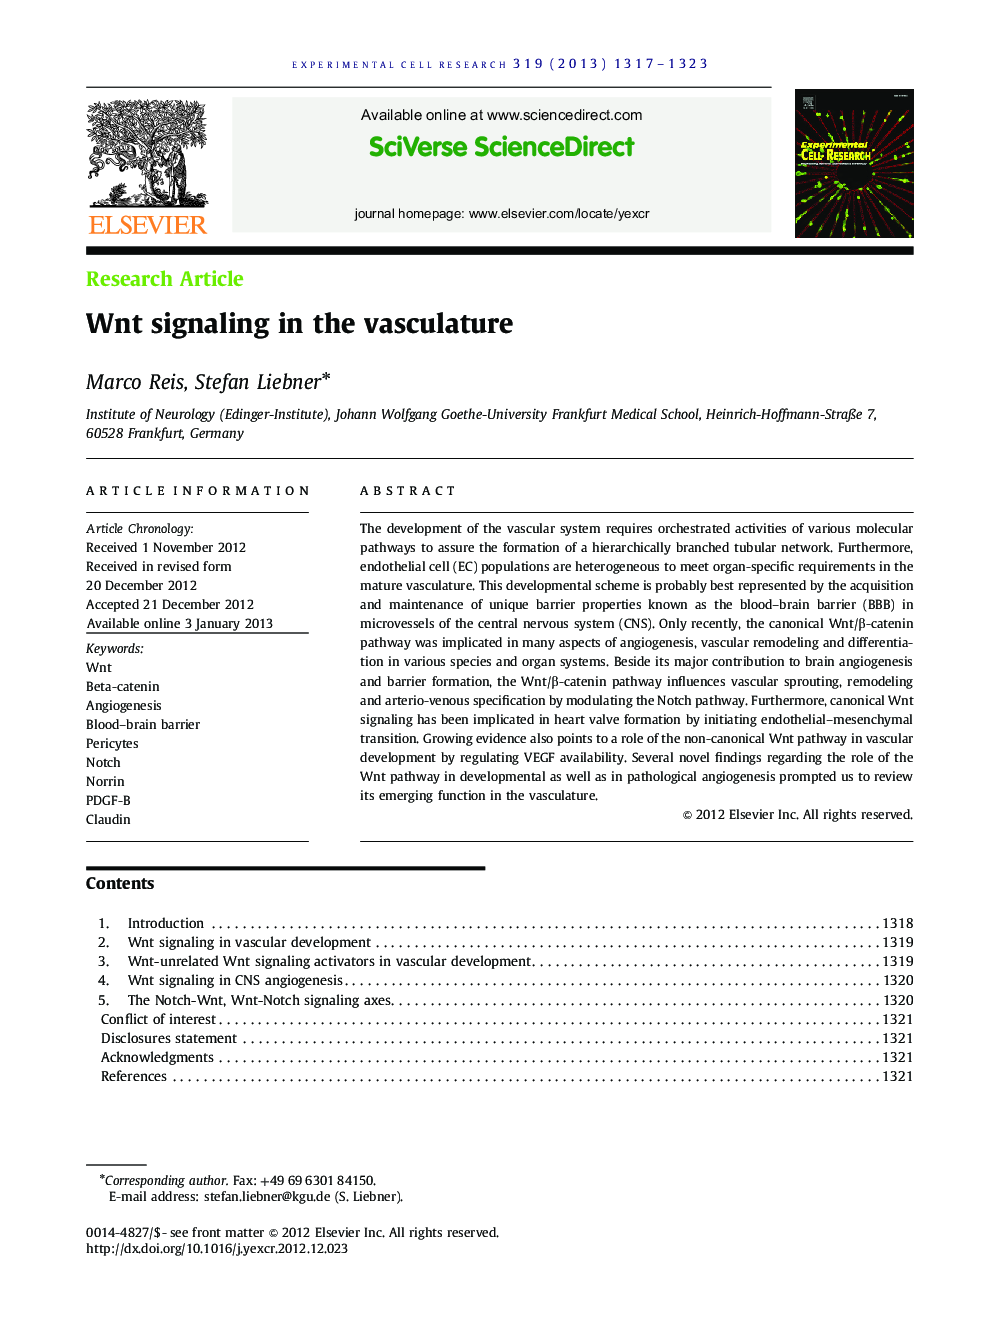 Wnt signaling in the vasculature